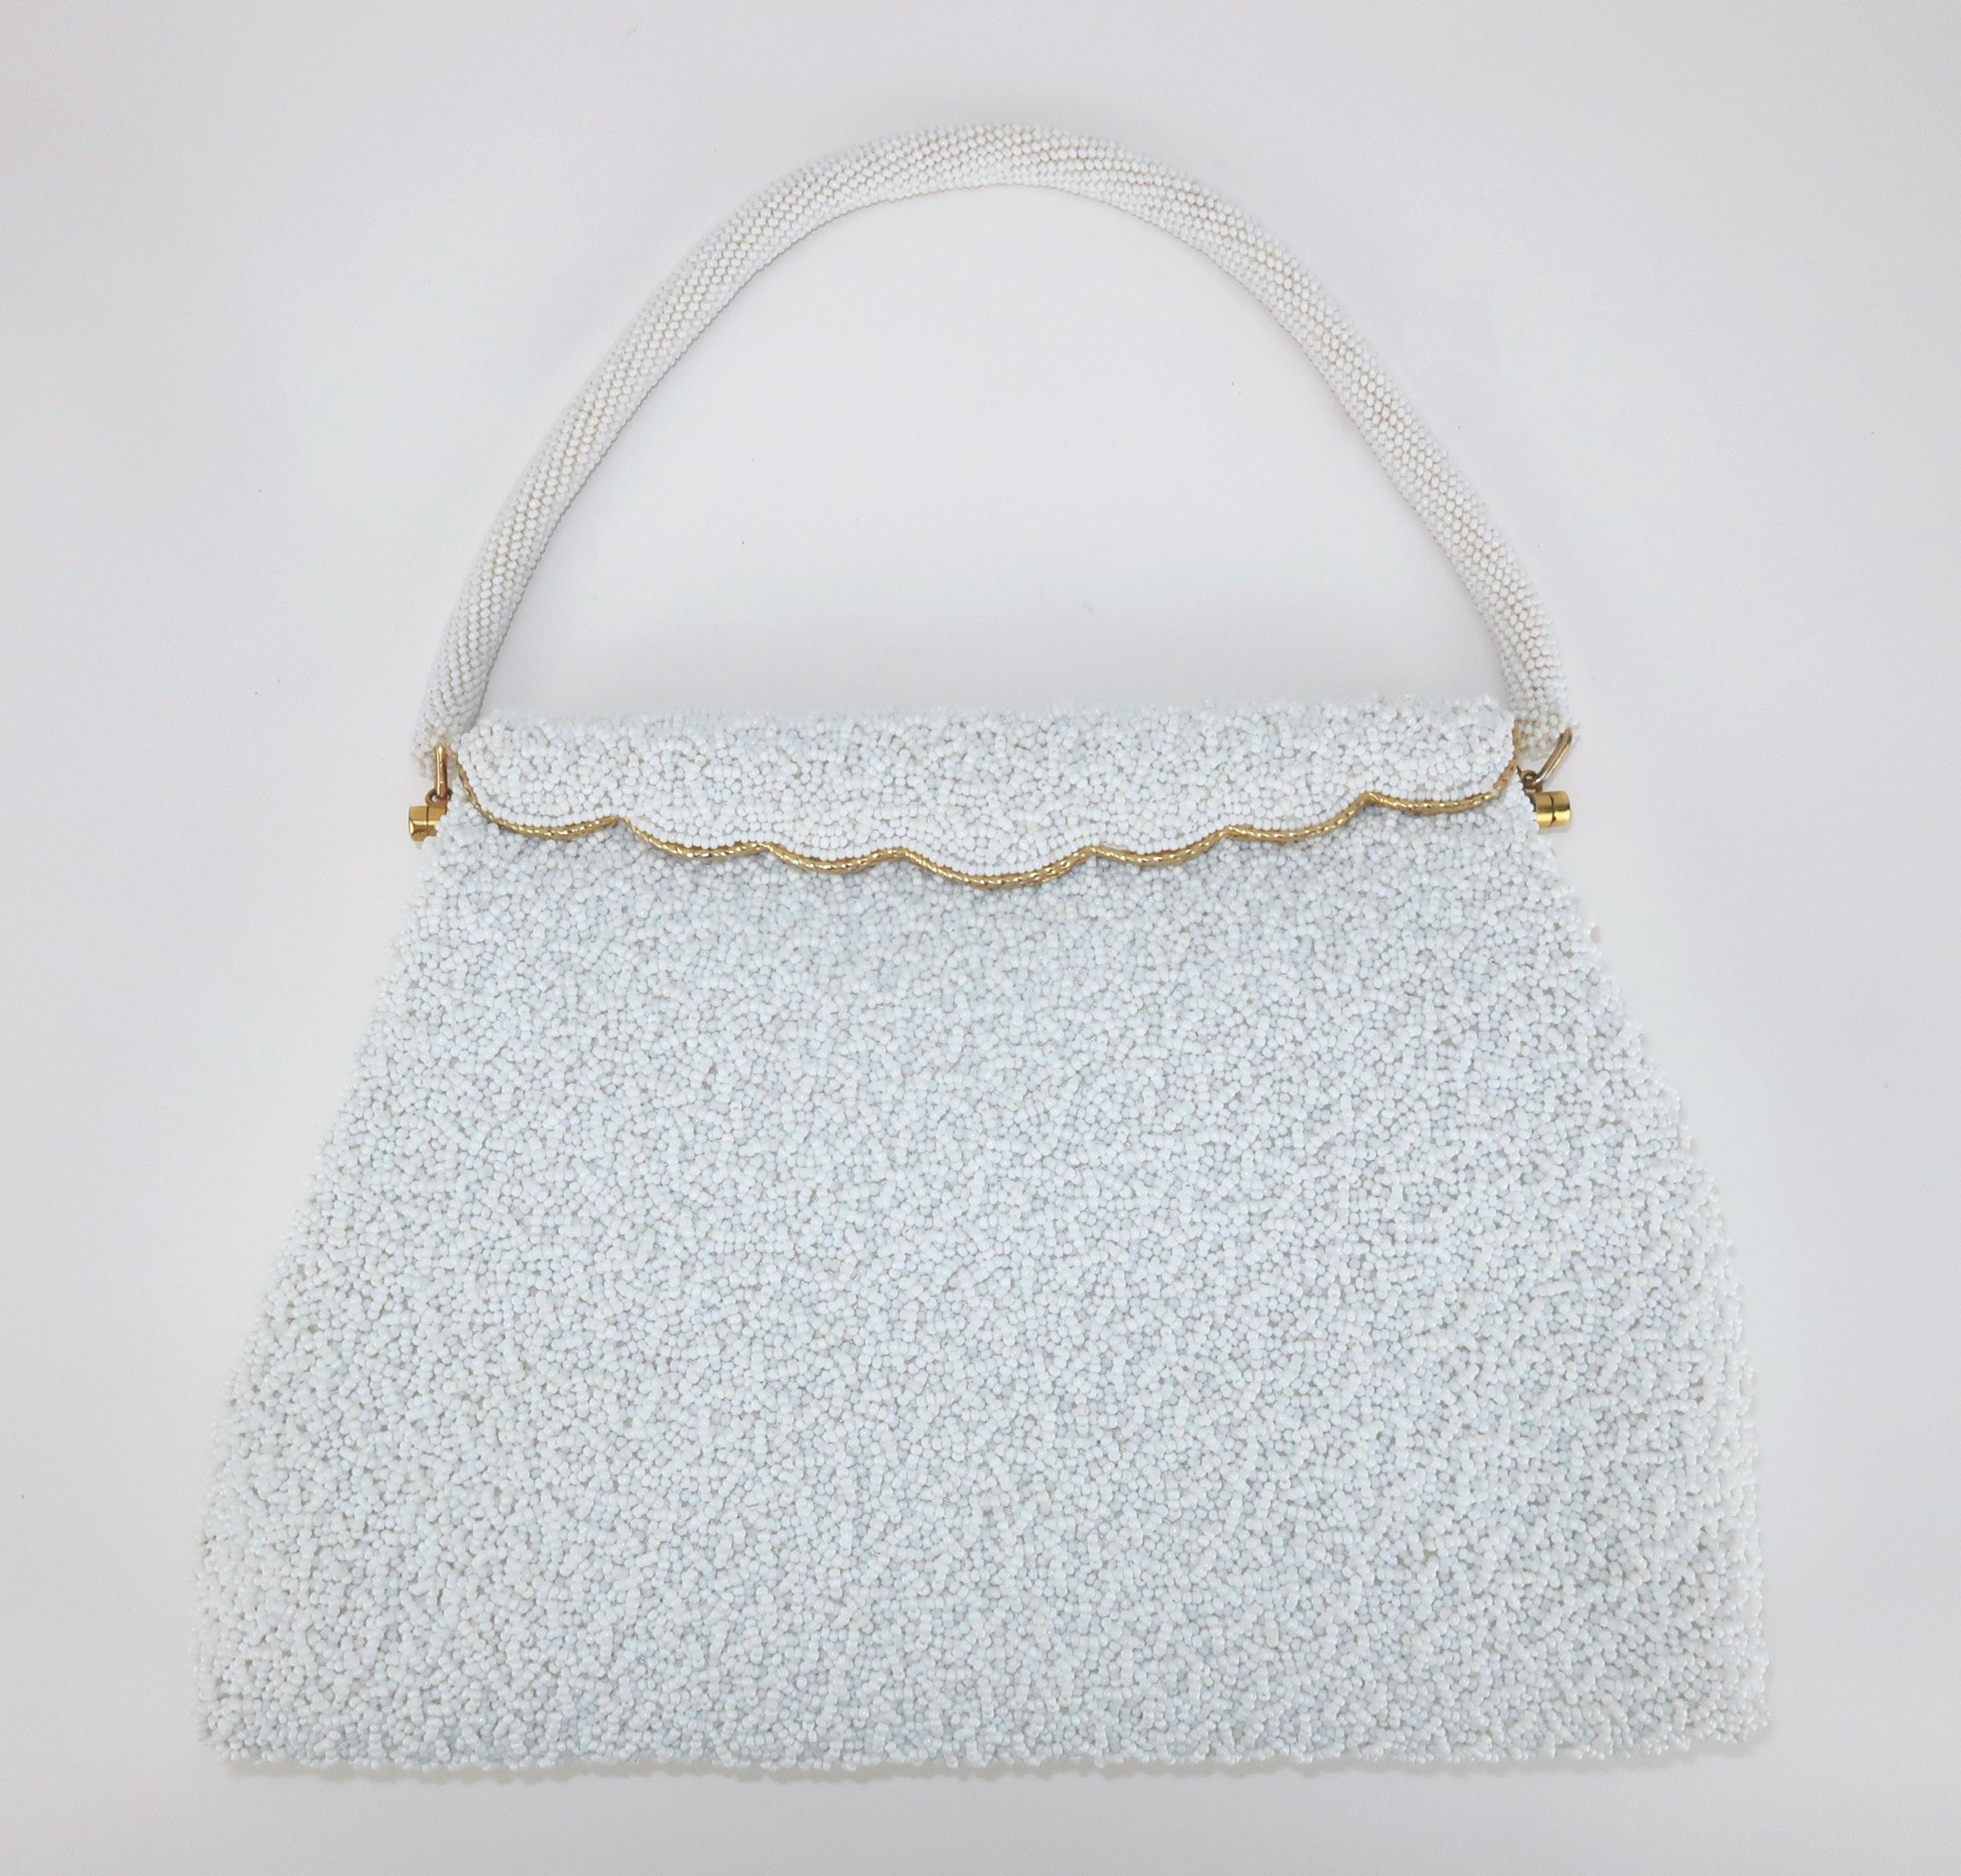 Lovely 1950’s white beaded handbag with a gilt gold metal frame. The beading on this bag is spectacular with every inch covered including the top handle.  The gilt gold frame is scalloped at the spring loaded front closure which opens to reveal a